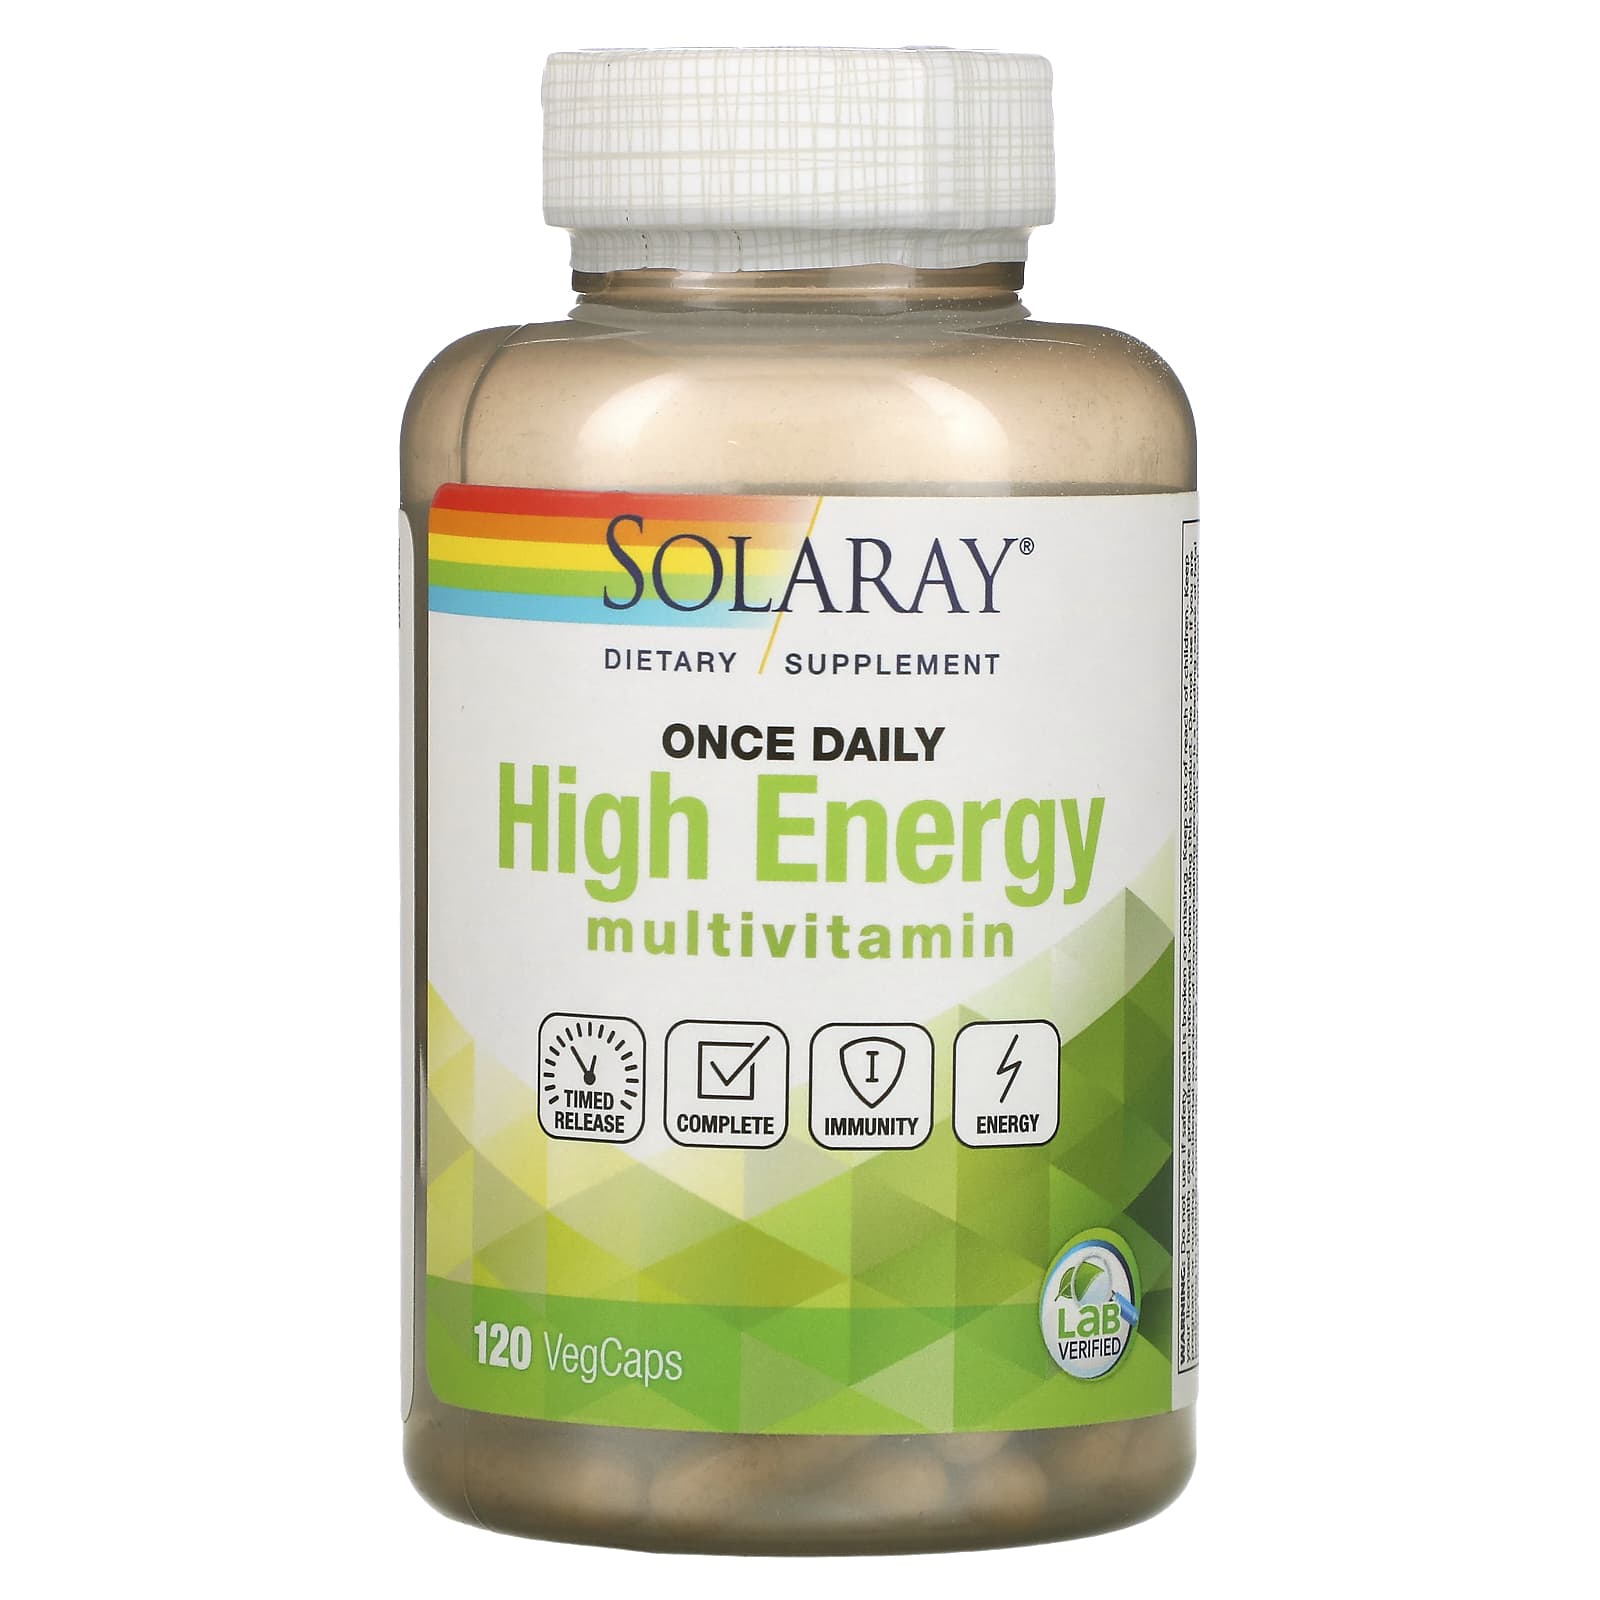 Solaray Once Daily High Energy Multivitamin Timed Release